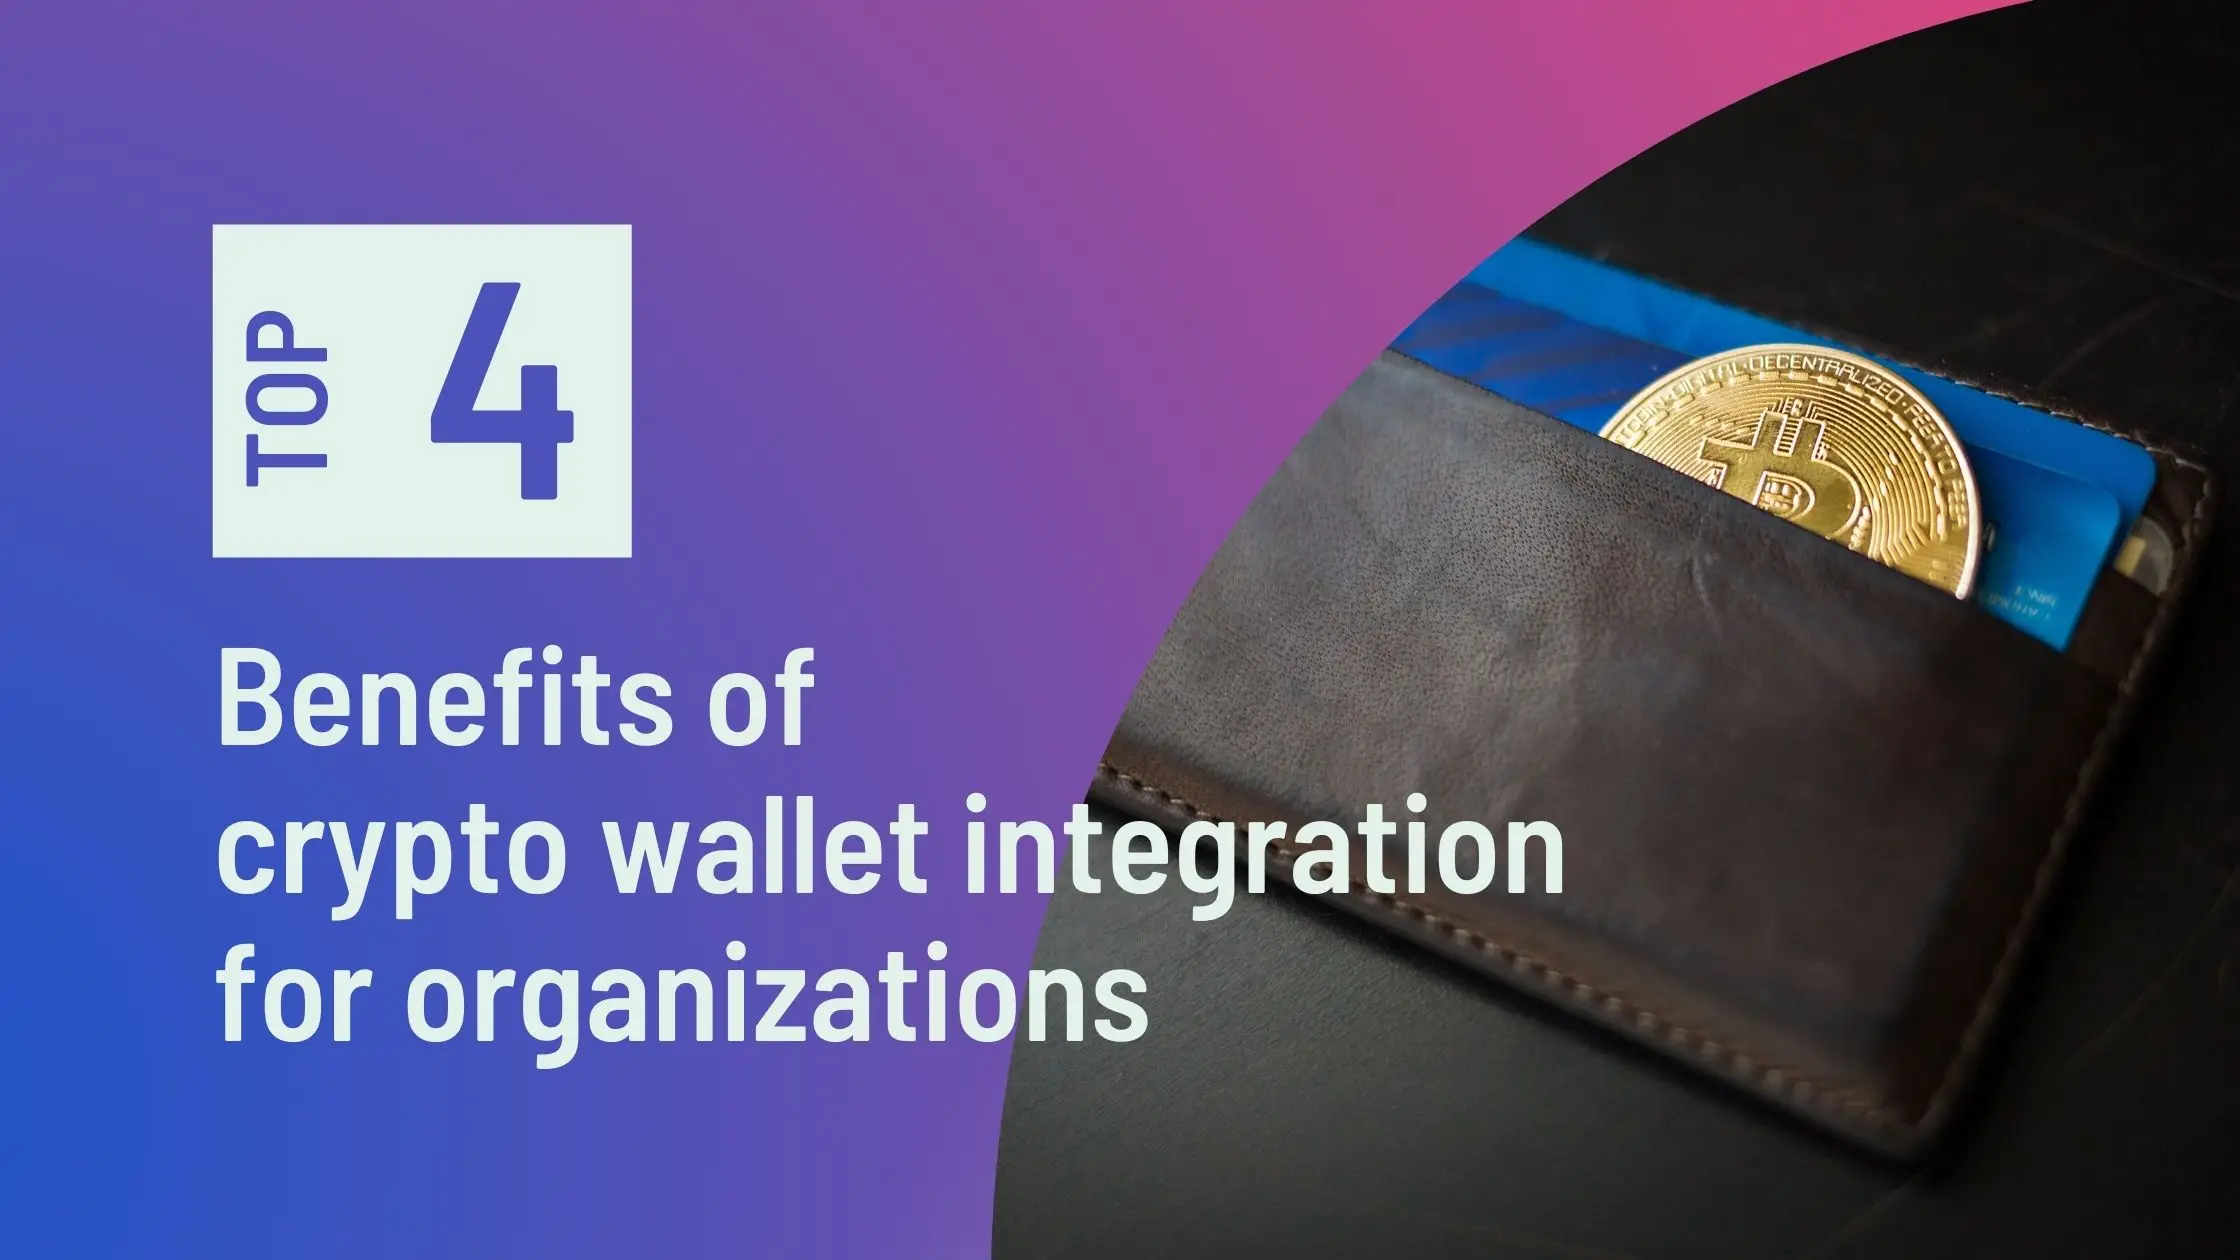 Benefits of crypto wallet integration for organizations